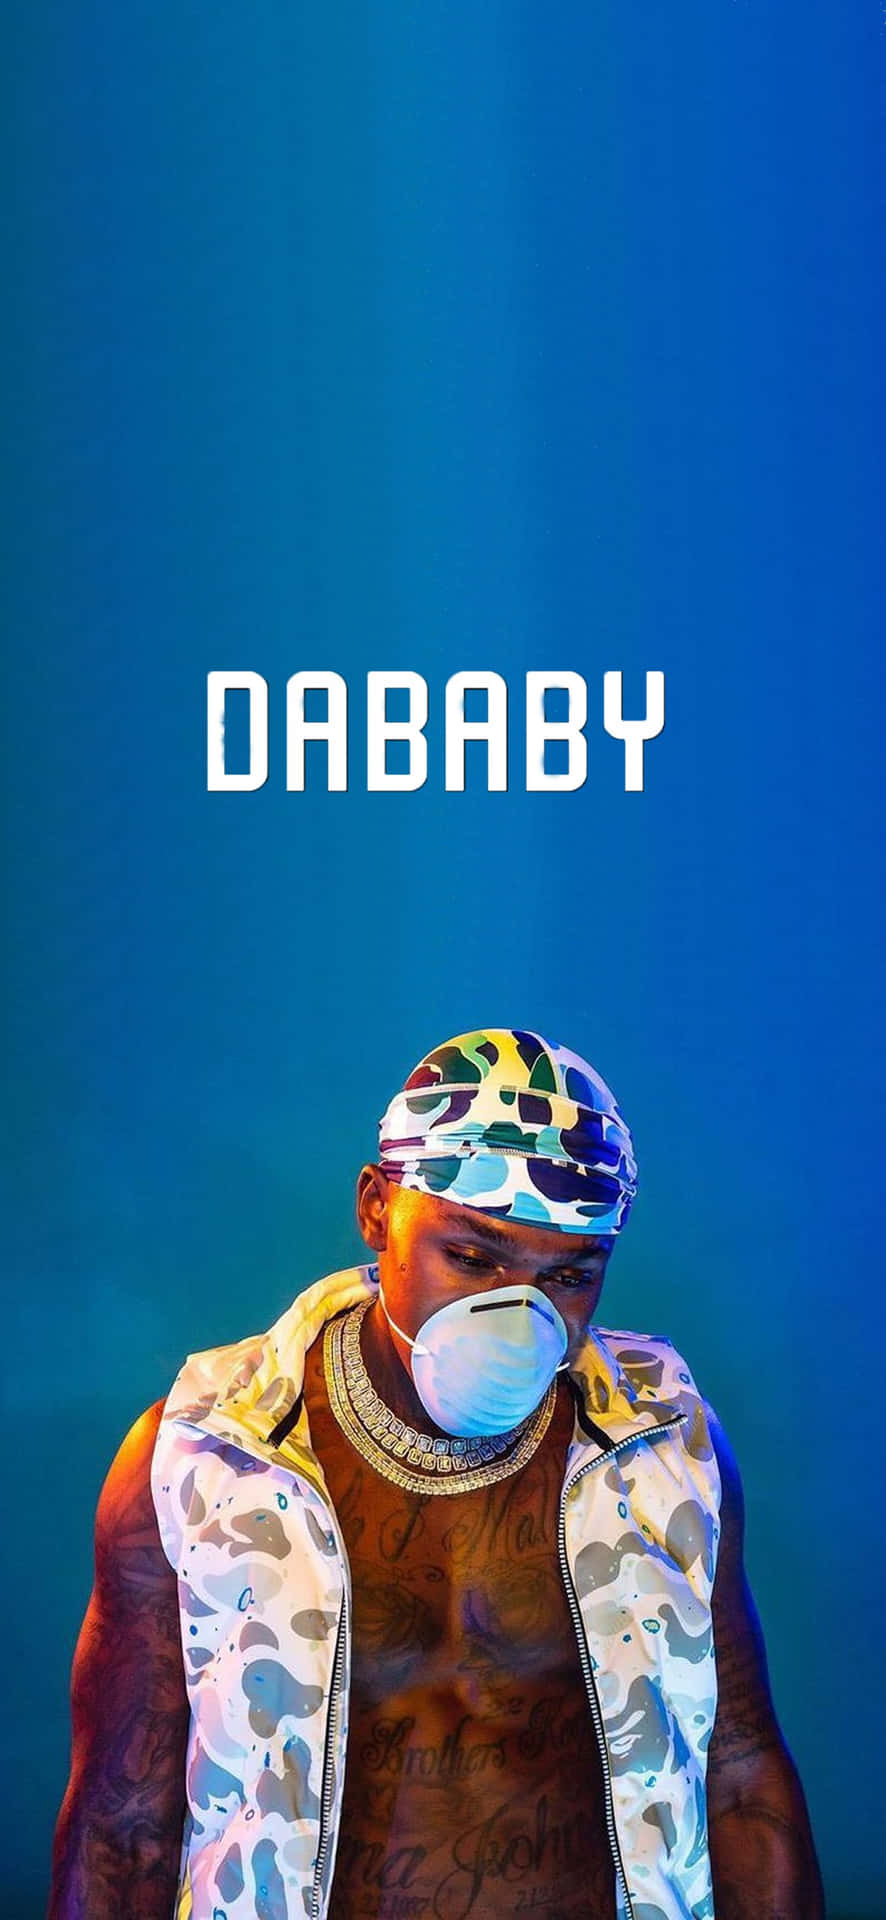 Dababy - A Man In Camouflage With A Bandana On His Head Wallpaper